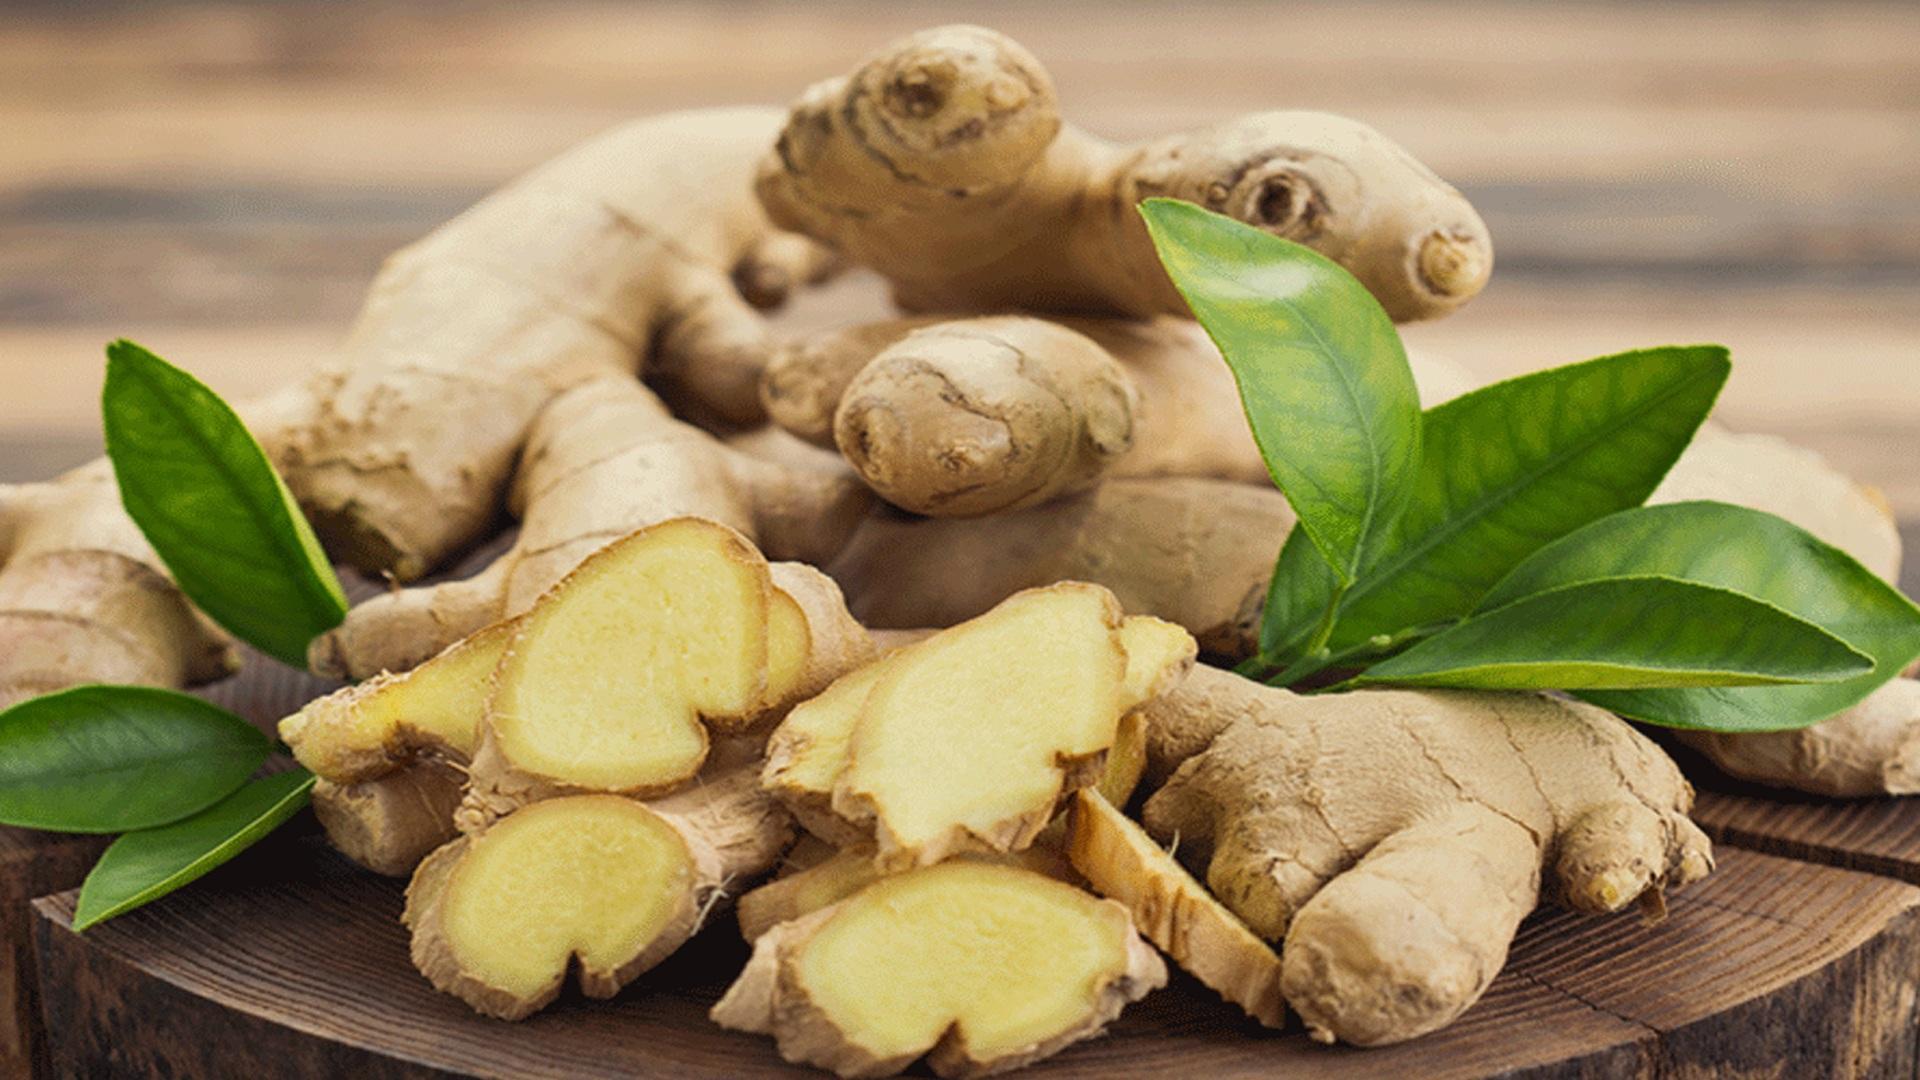 The Benefits of Ginger Juice: Recipe, Extractors, and More